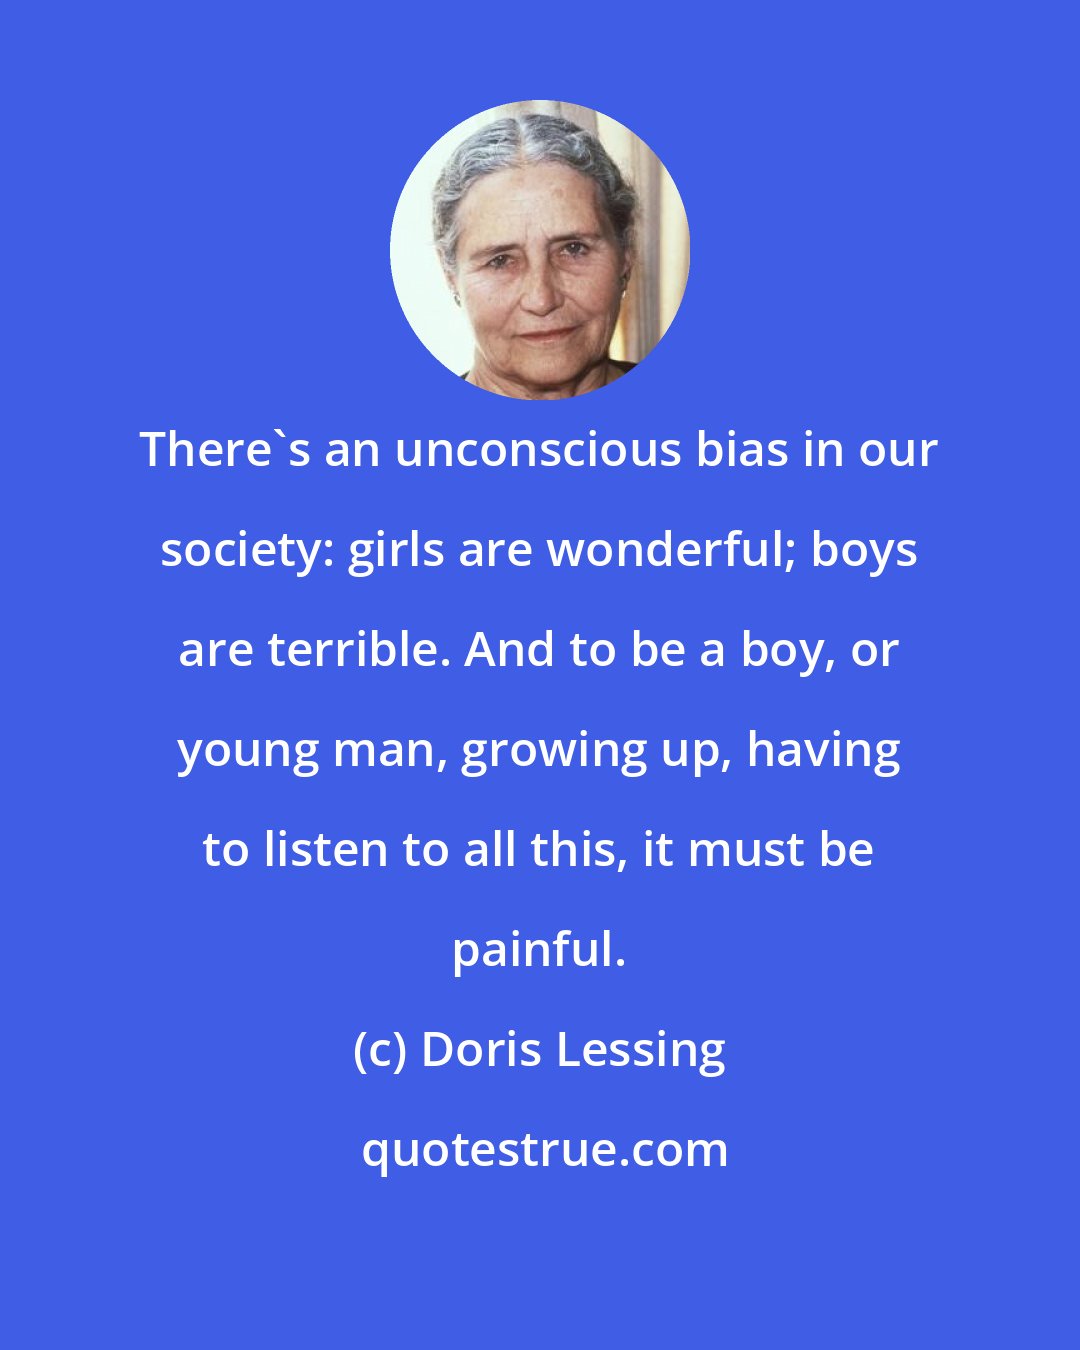 Doris Lessing: There's an unconscious bias in our society: girls are wonderful; boys are terrible. And to be a boy, or young man, growing up, having to listen to all this, it must be painful.